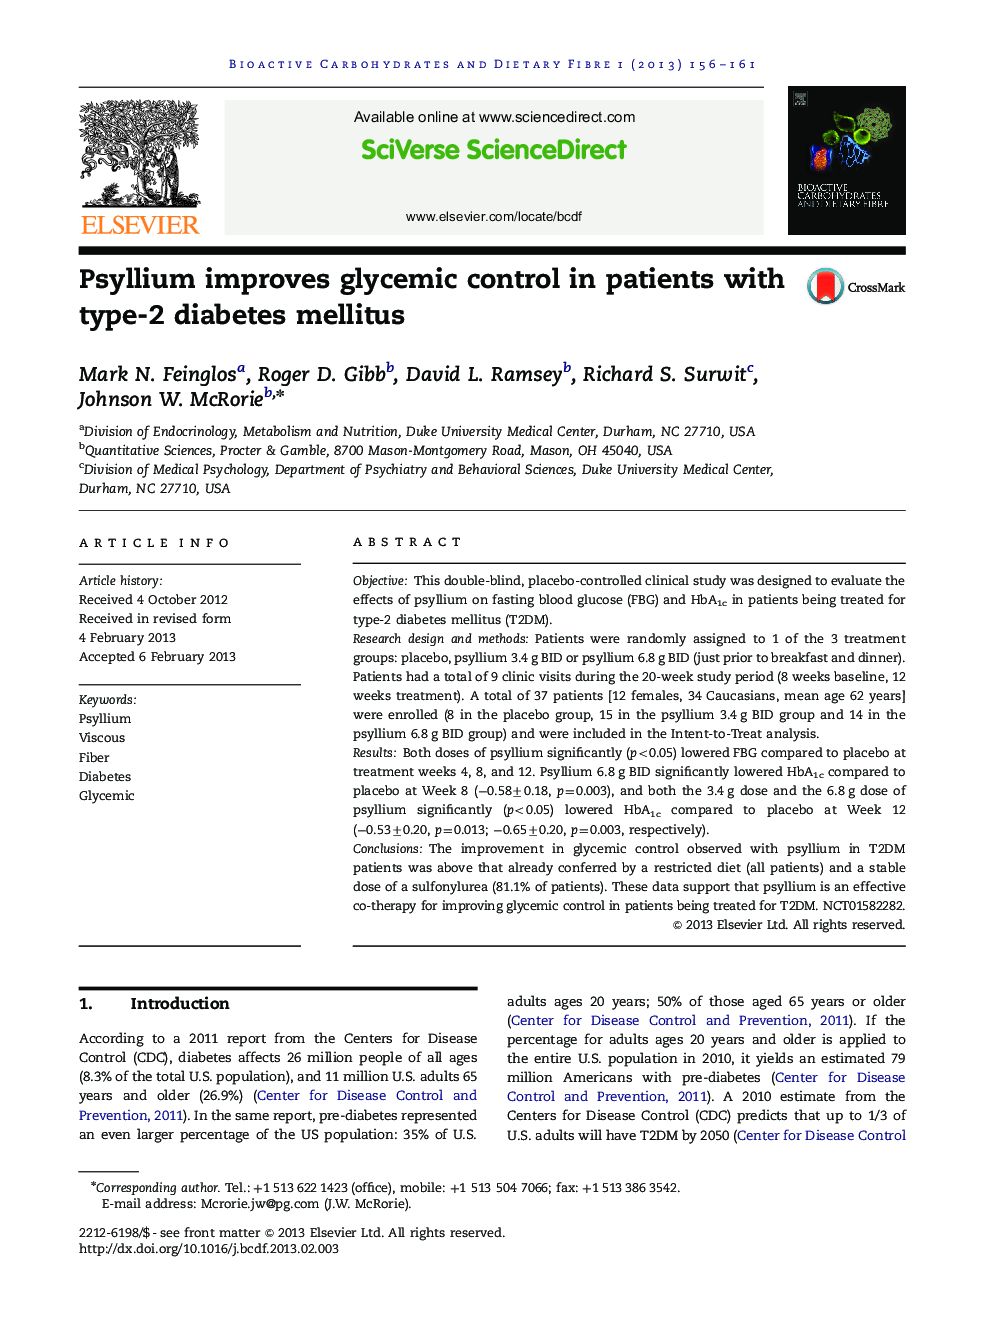 Psyllium improves glycemic control in patients with type-2 diabetes mellitus